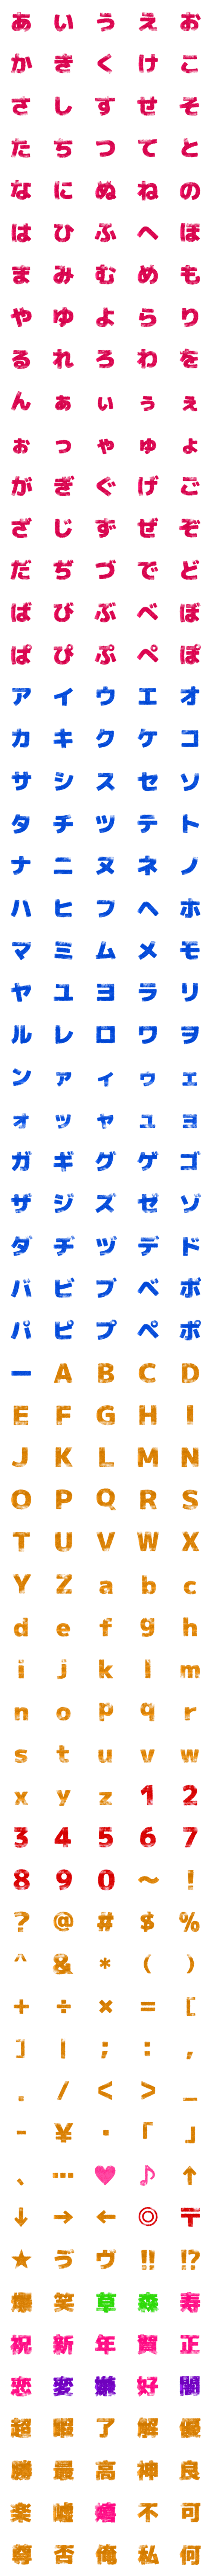 [LINE絵文字]スタンプ風デコ文字 -ゴシック体-の画像一覧